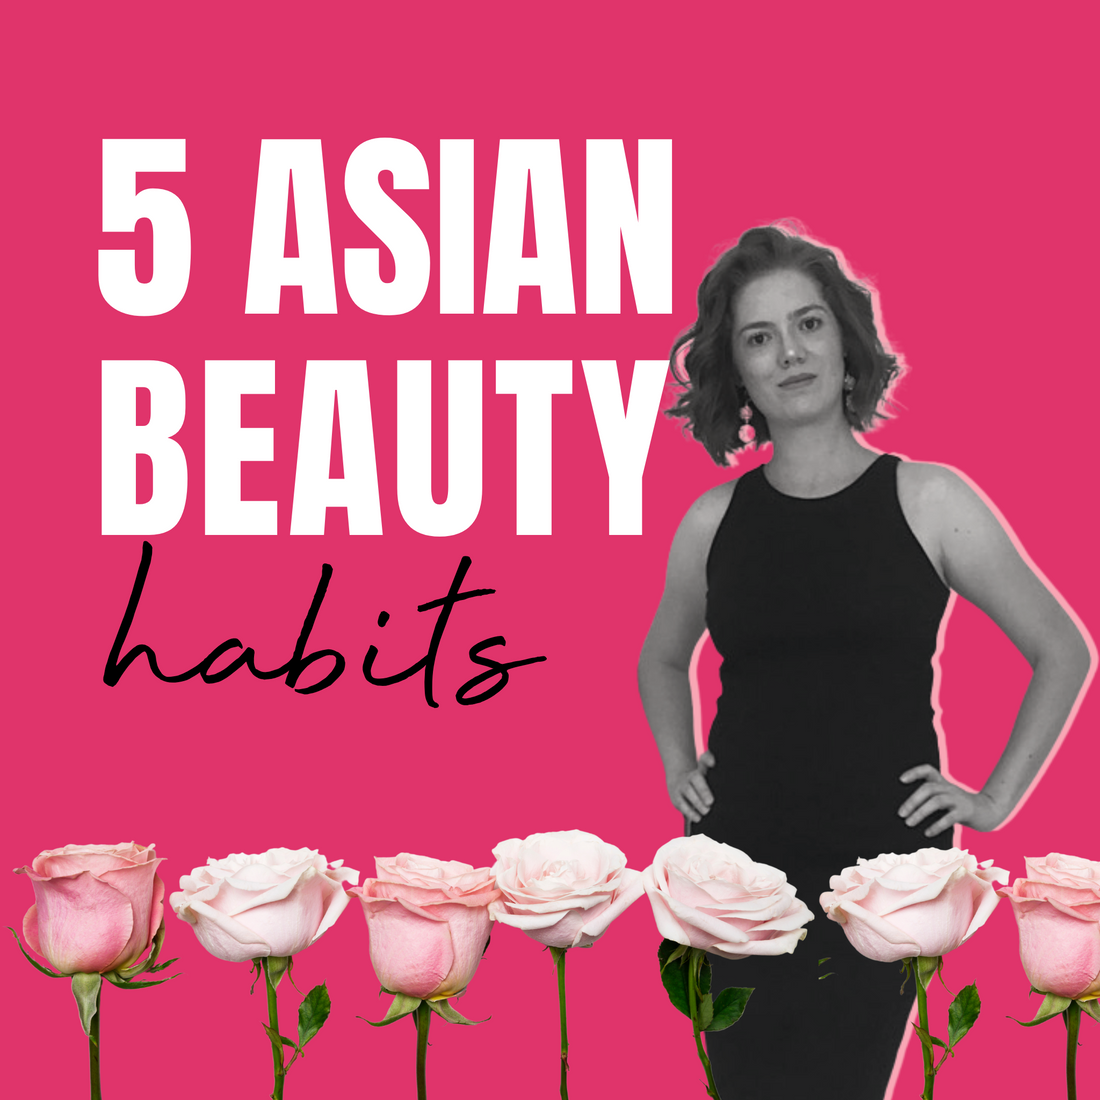 5 Asian beauty habits you need to adopt for glowing skin